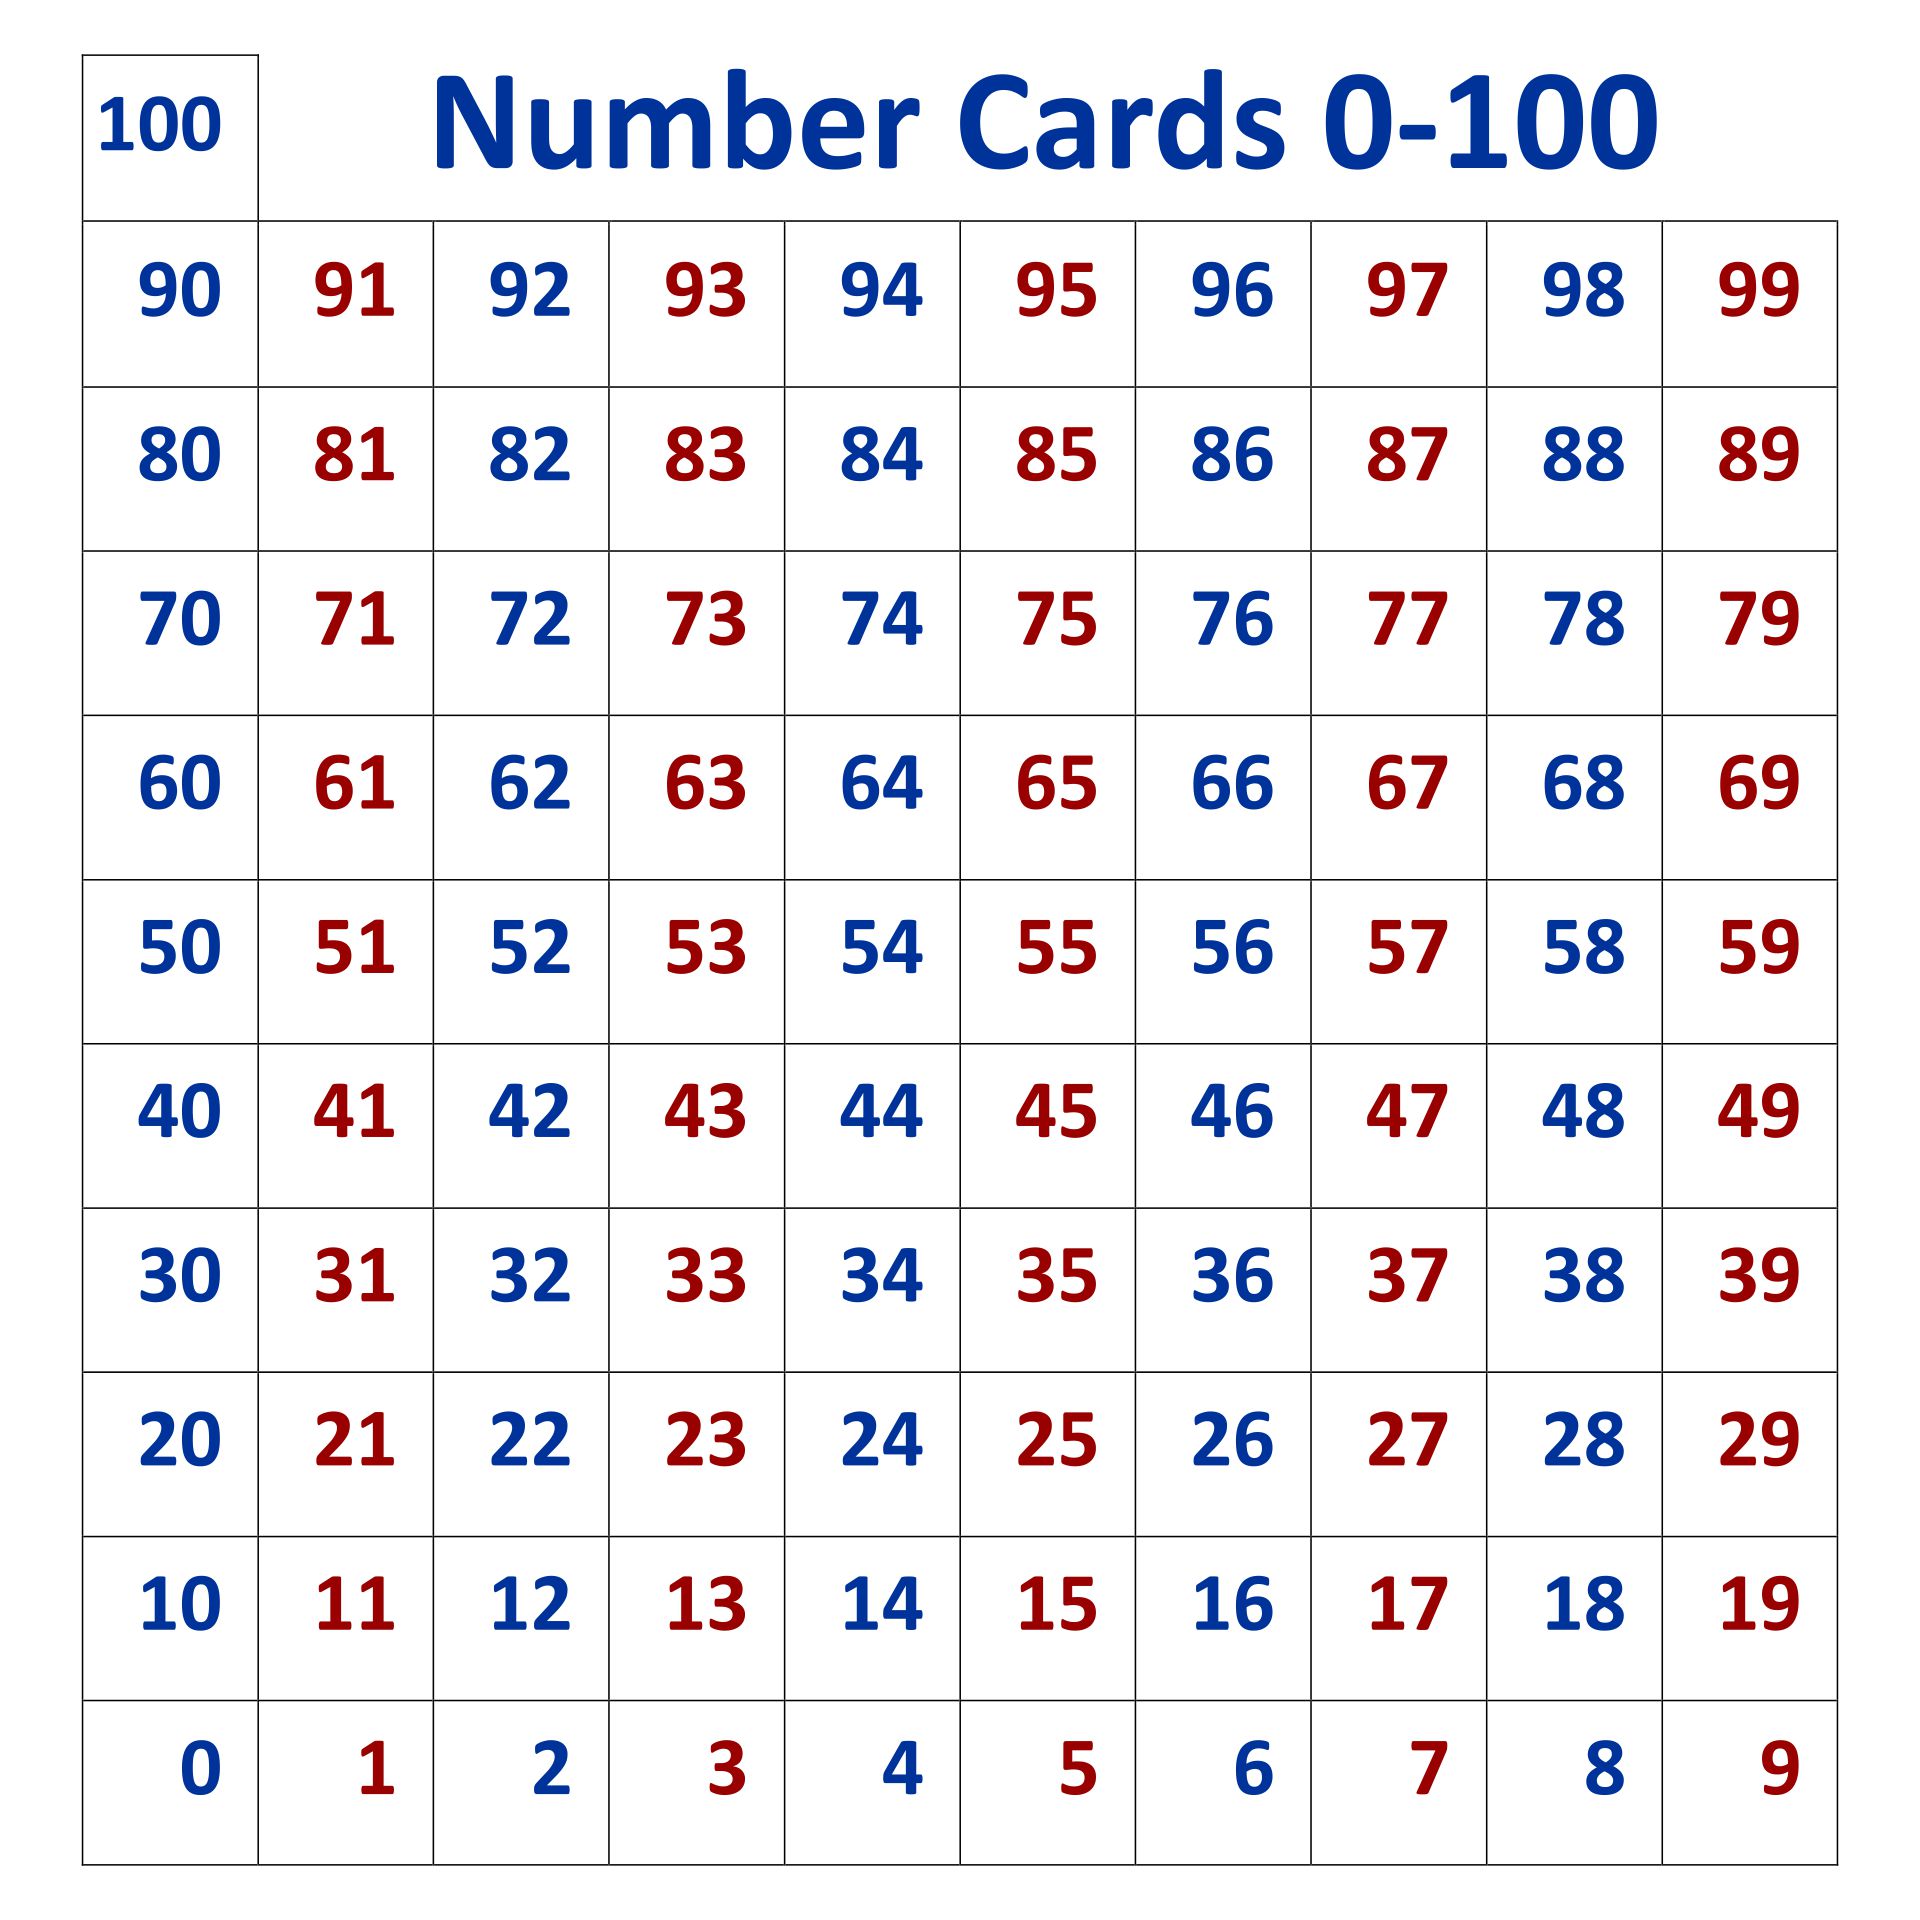 7-best-images-of-number-cards-1-100-printable-number-cards-1-20